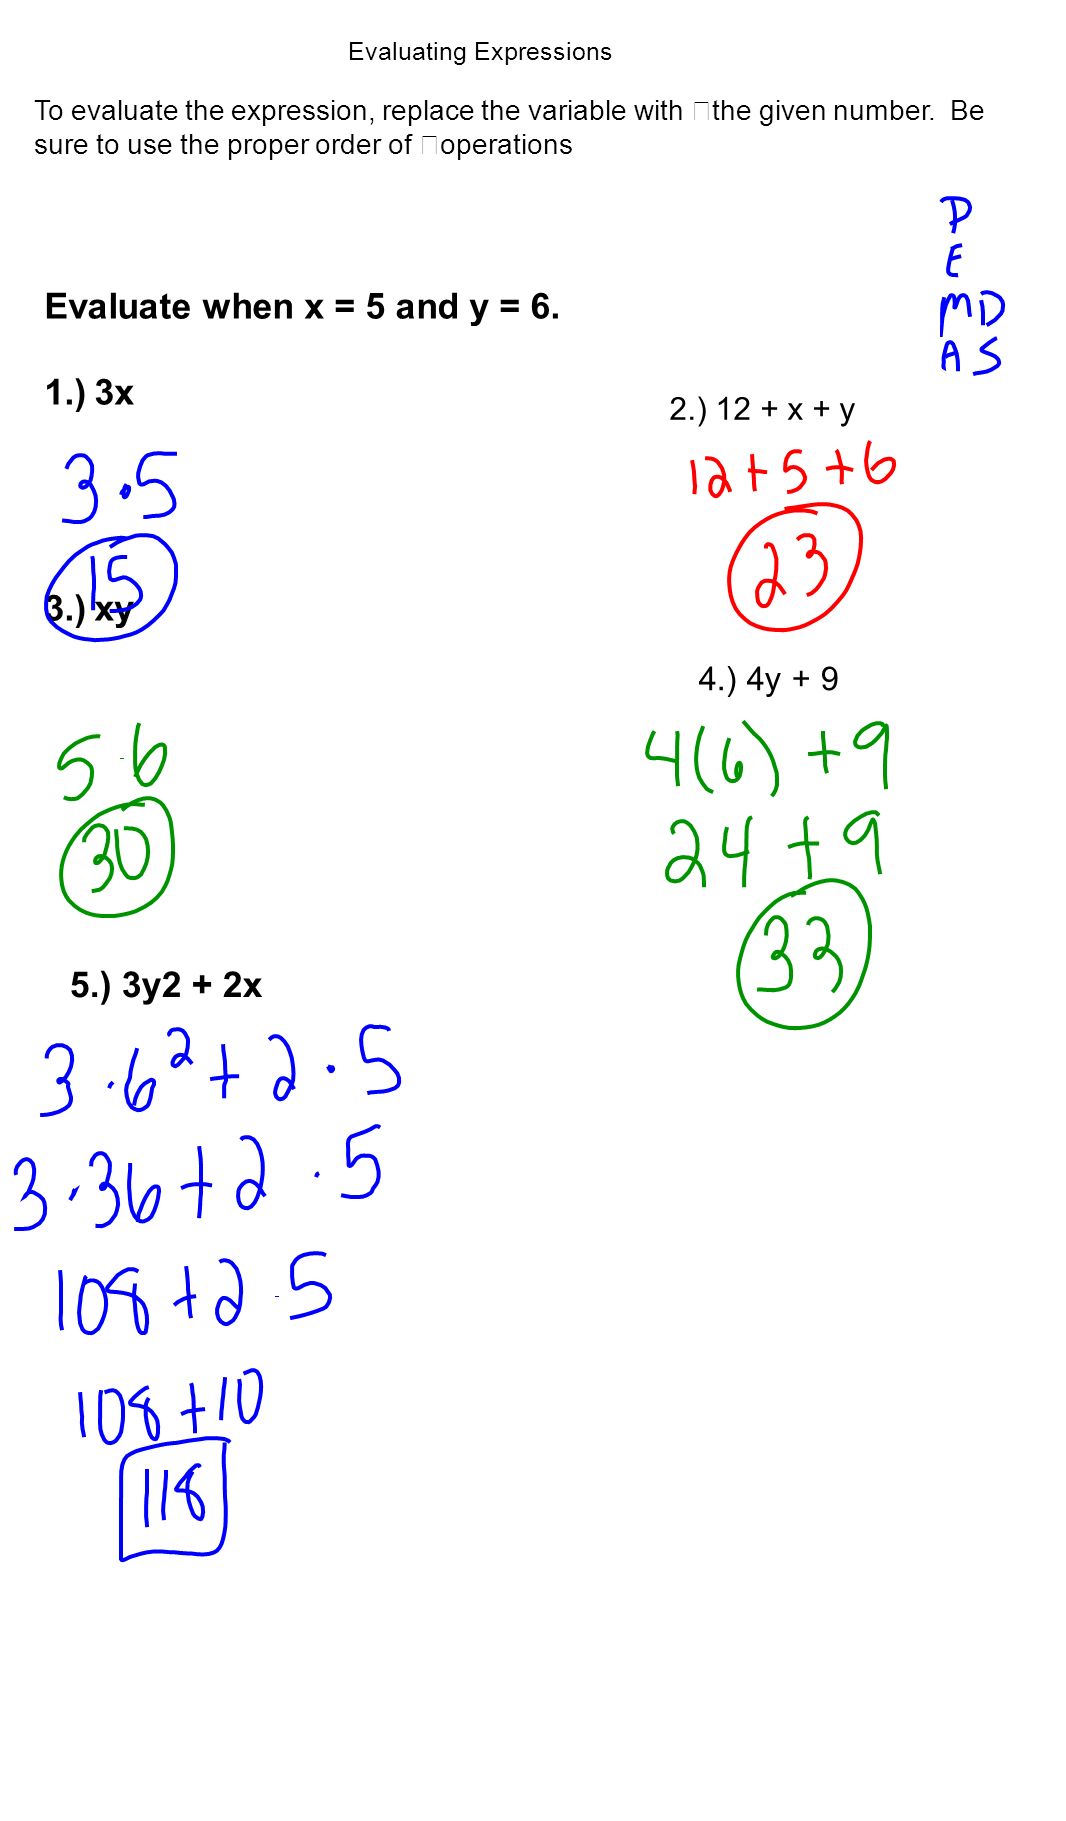 Evaluating Expressions To evaluate the expression, replace the variable with the given number.